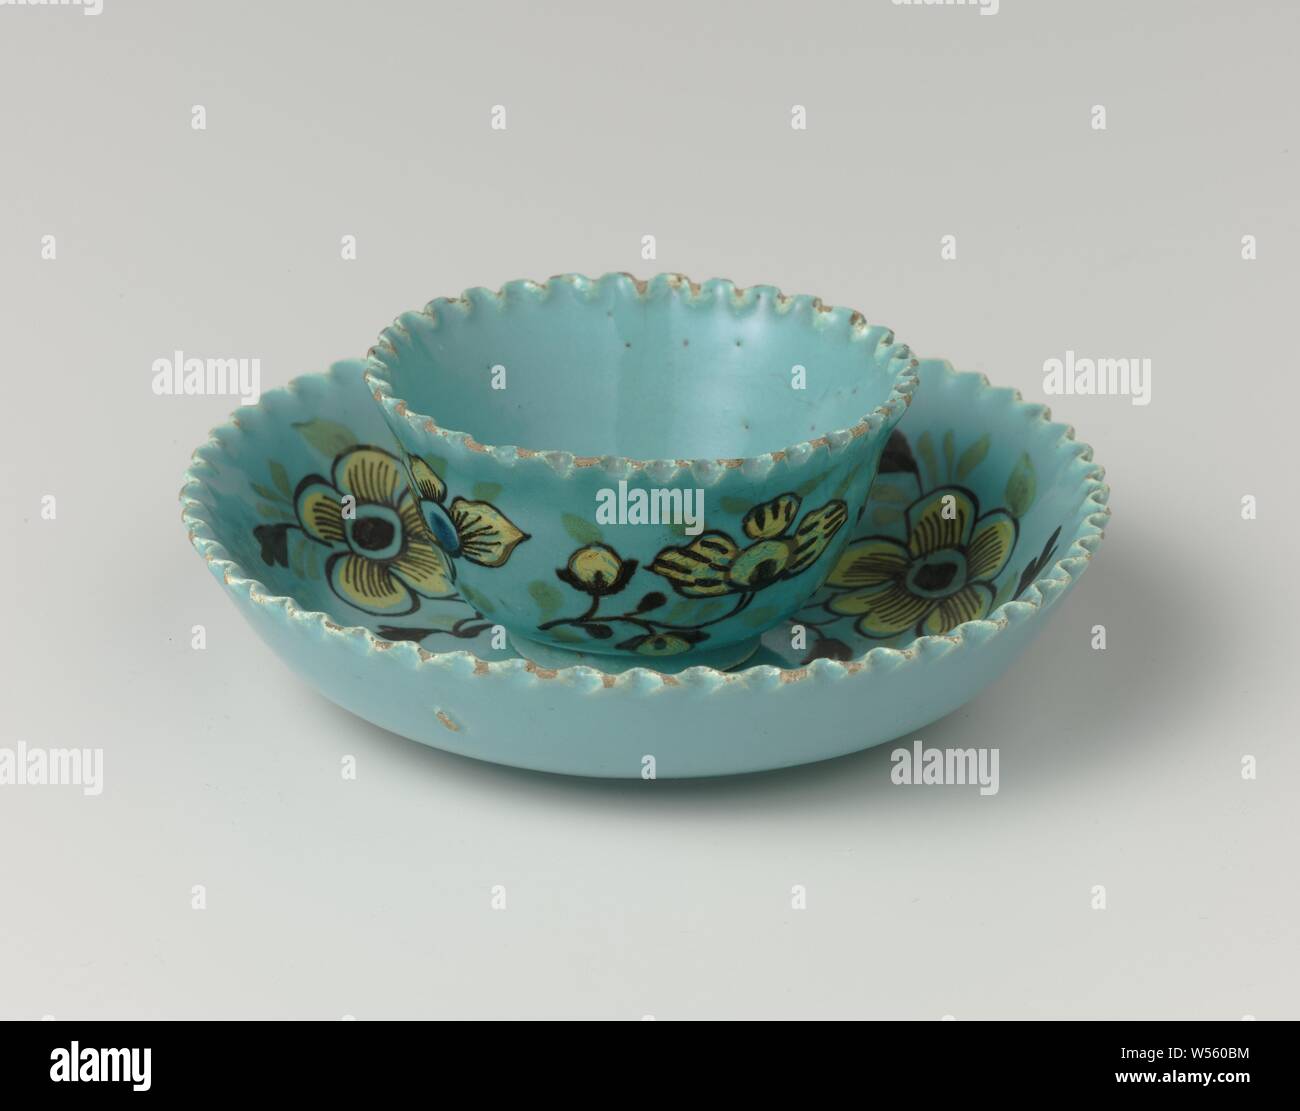 Dish, Dish of multi-colored faience. The cup and saucer are painted with yellow flowers on a turquoise background. The edges of the dish are serrated., anonymous, Delft, c. 1720 - c. 1750, earthenware, tin glaze, h 2.5 cm × d 11.0 cm Stock Photo